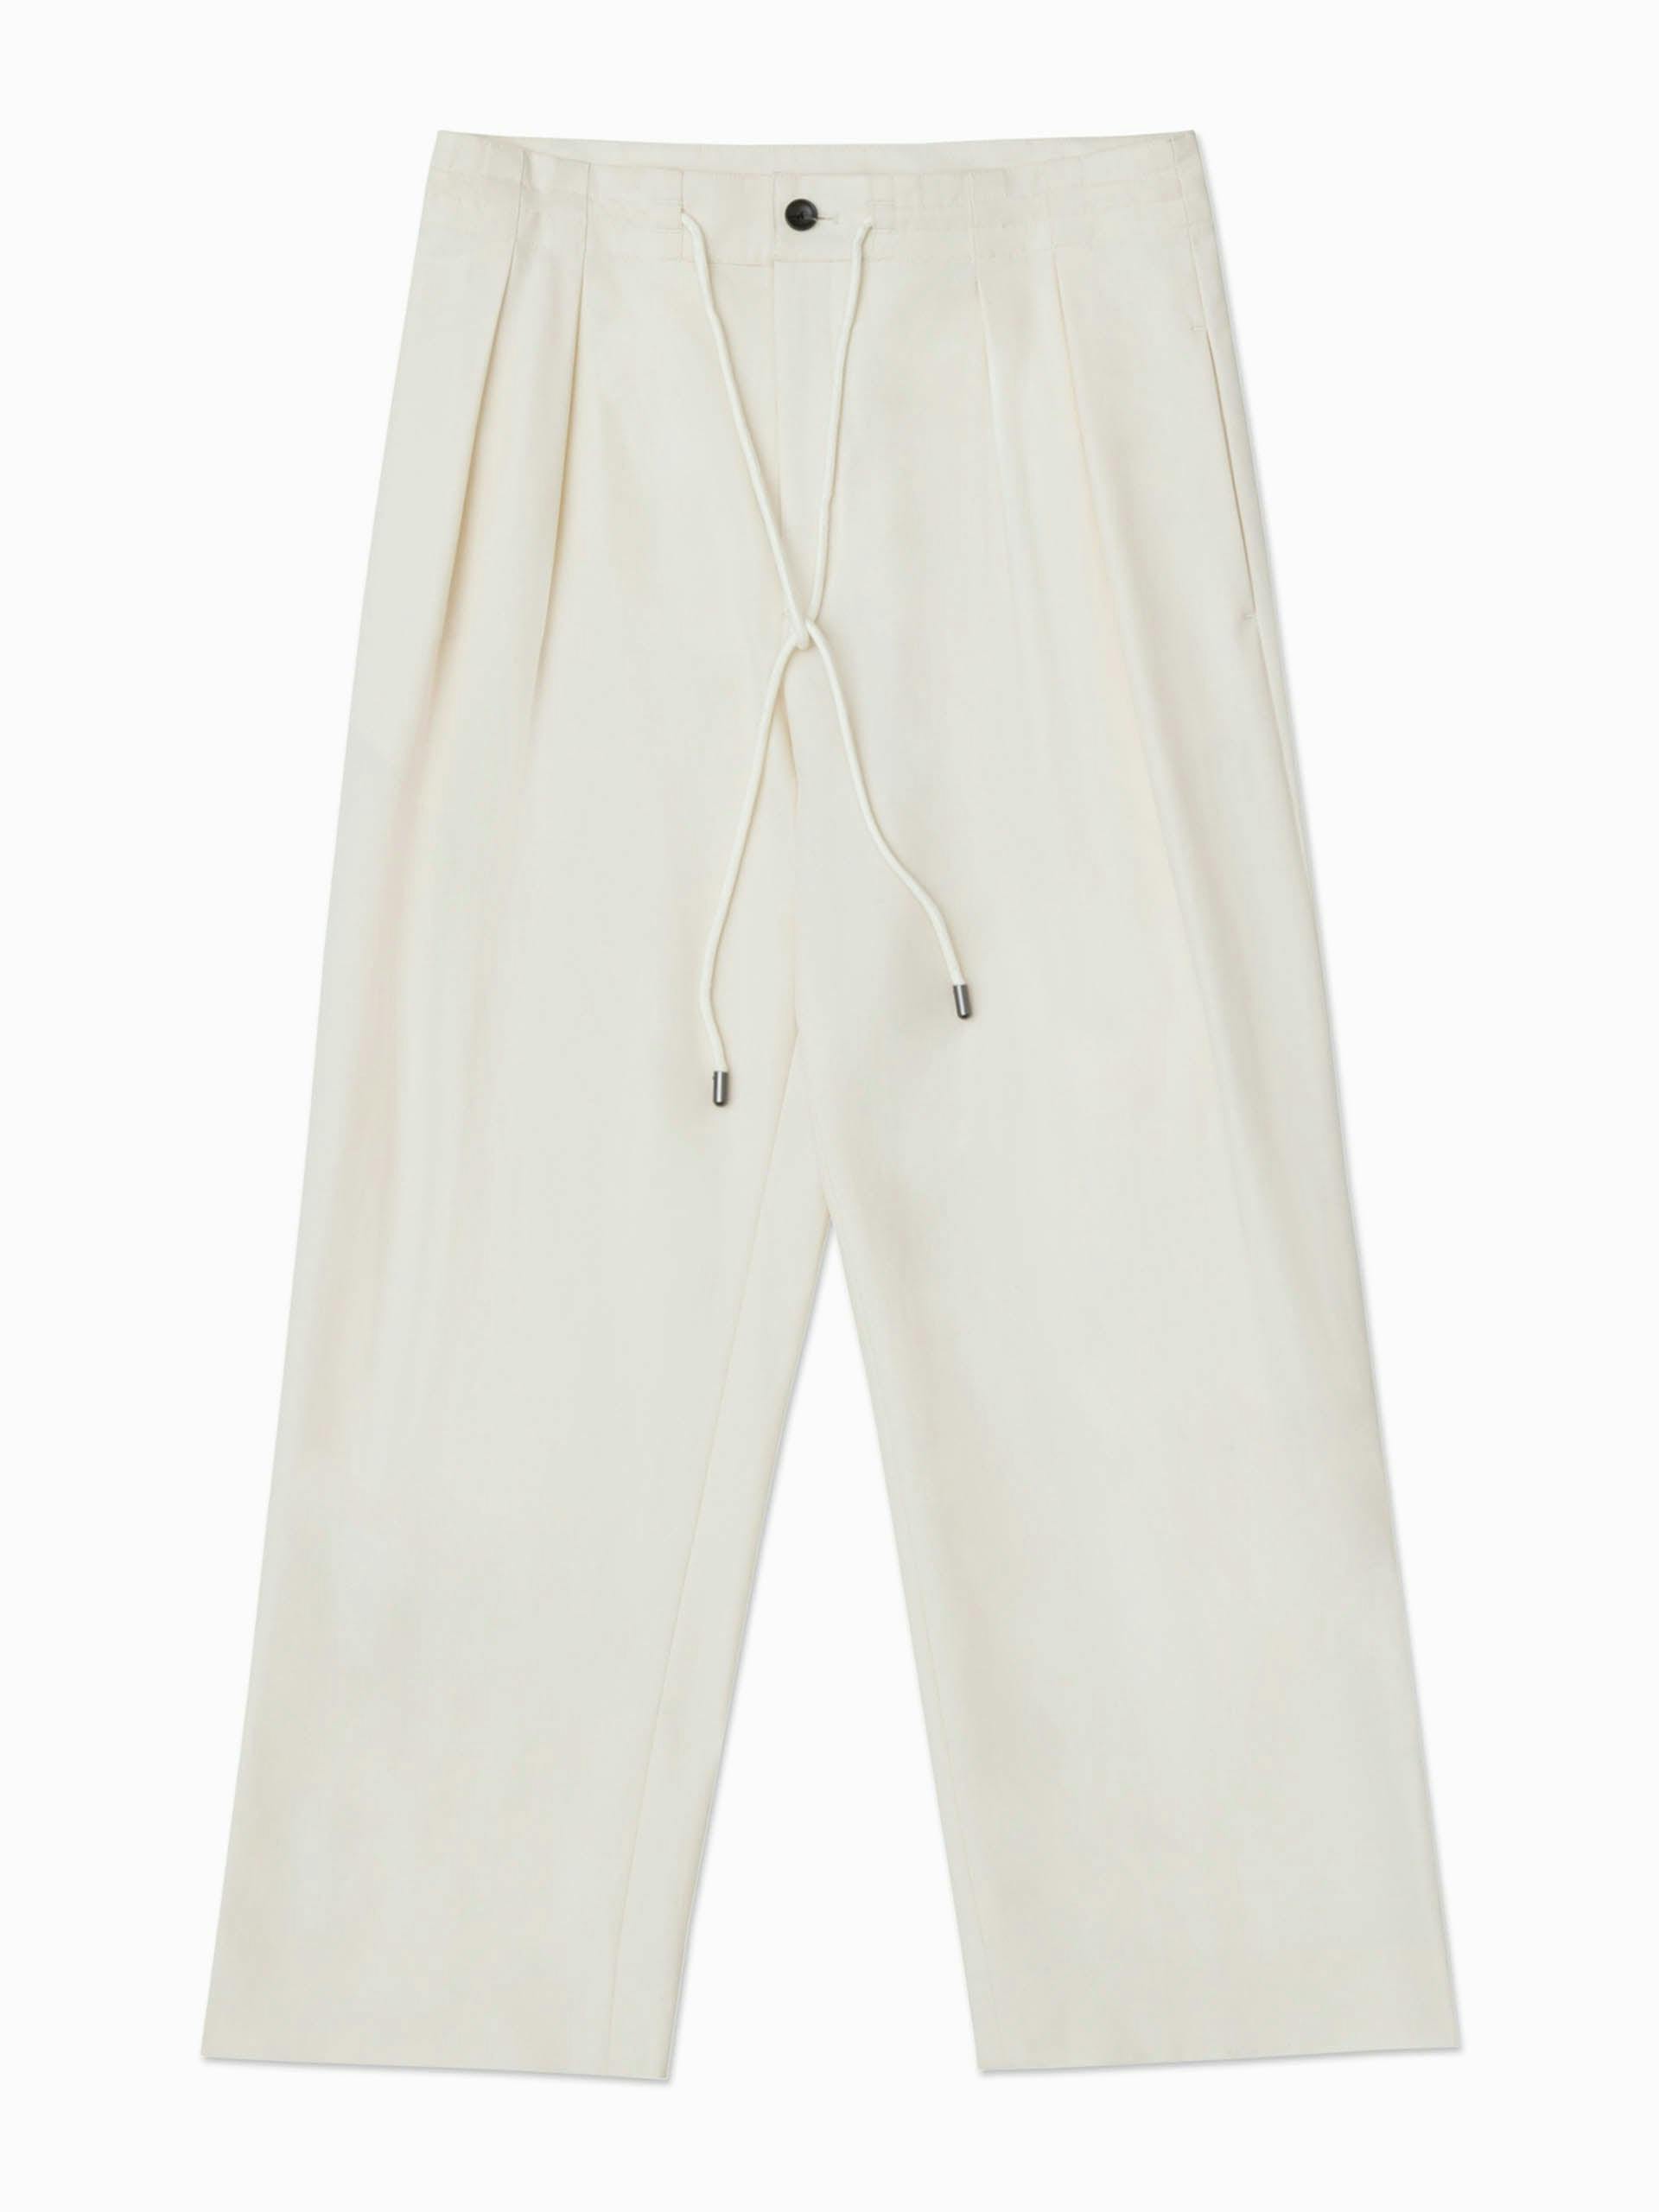 Ivory pleat front drawstring trousers